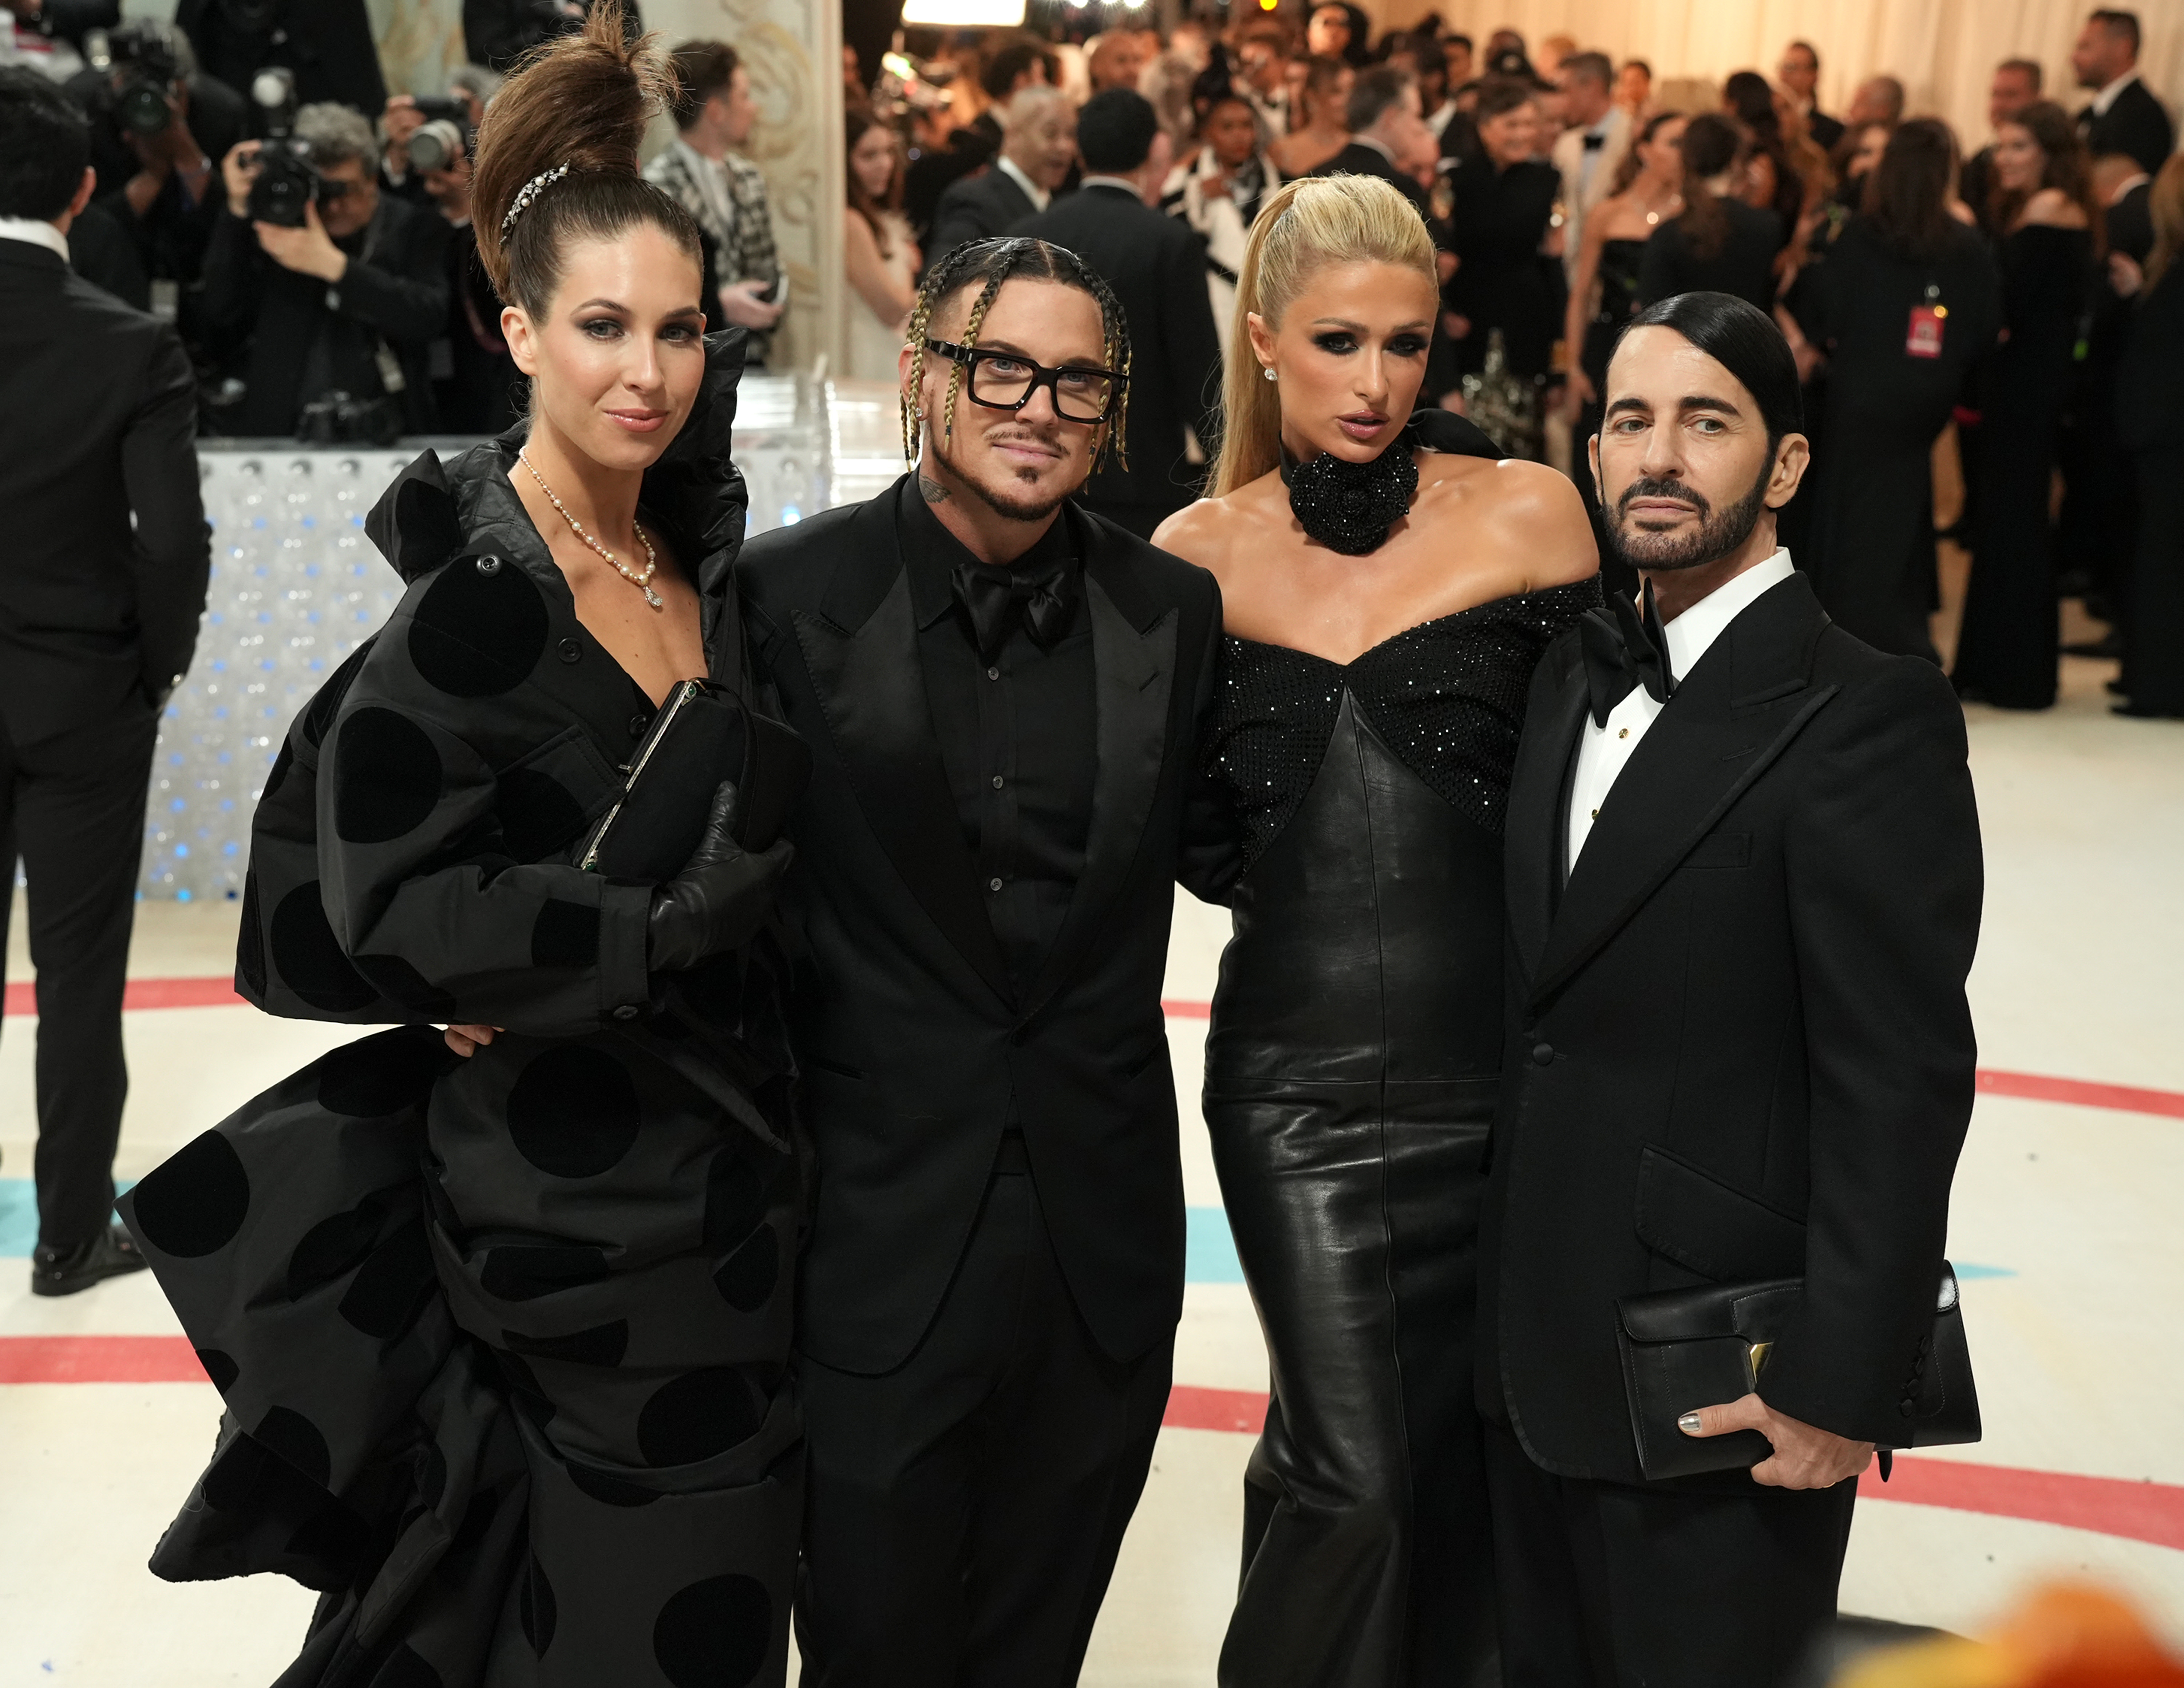 Colby Mugrabi, Charly Defrancesco, Paris Hilton, and Marc Jacobs attend The Met Gala Celebrating "Karl Lagerfeld: A Line Of Beauty" at The Metropolitan Museum of Art in New York City, on May 1, 2023. | Source: Getty Images